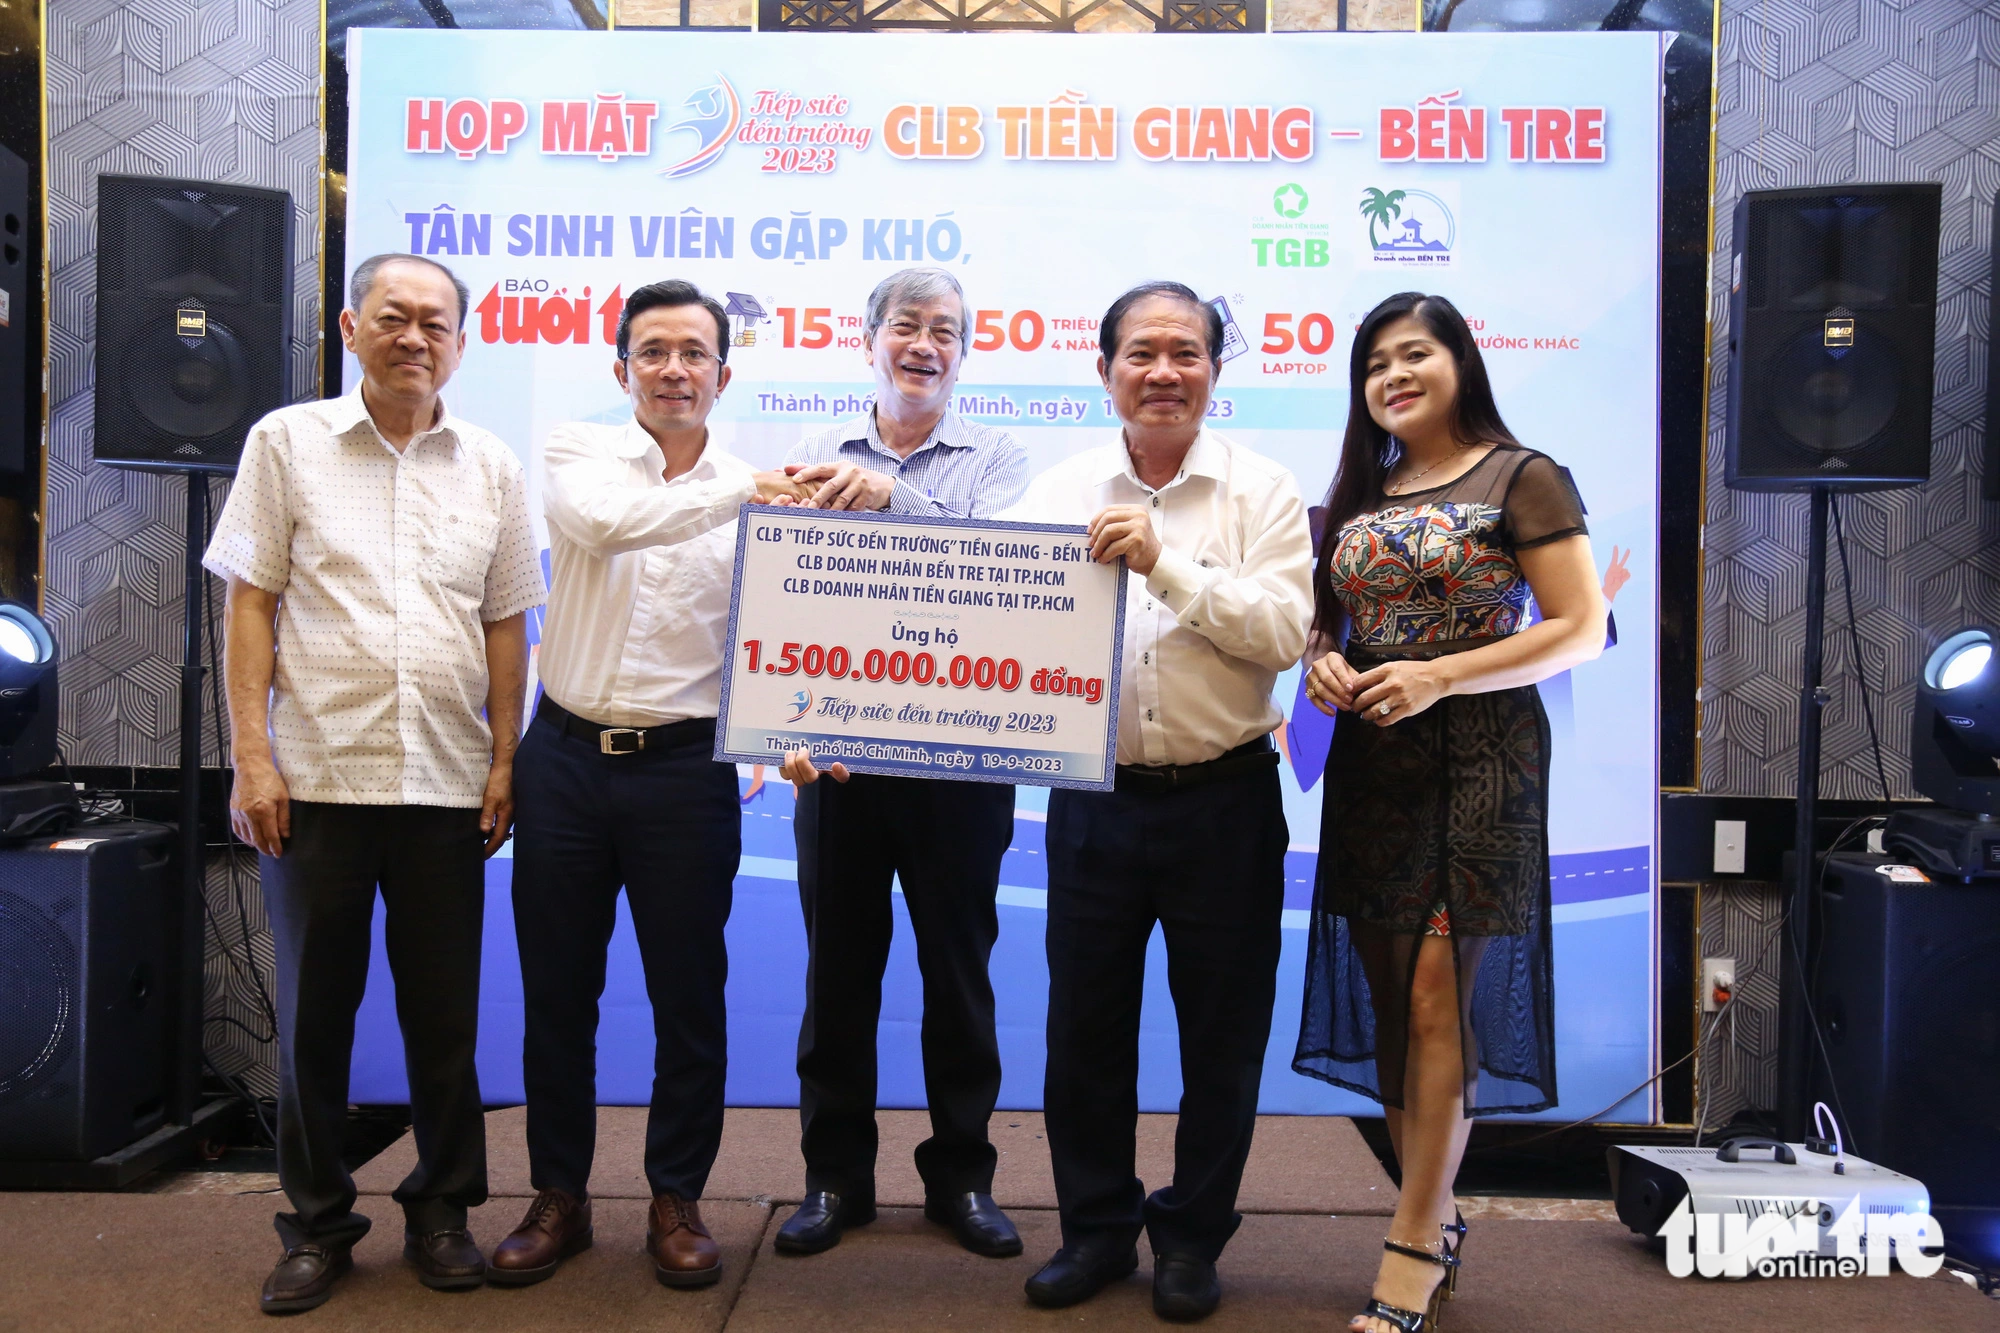 Mr. Nguyen Kim Lan (center) presented a sum of 1.5 billion VND to Tran Xuan Toan, deputy editor-in-chief of Tuoi Tre newspaper - Photo: Phuong Quanyen 